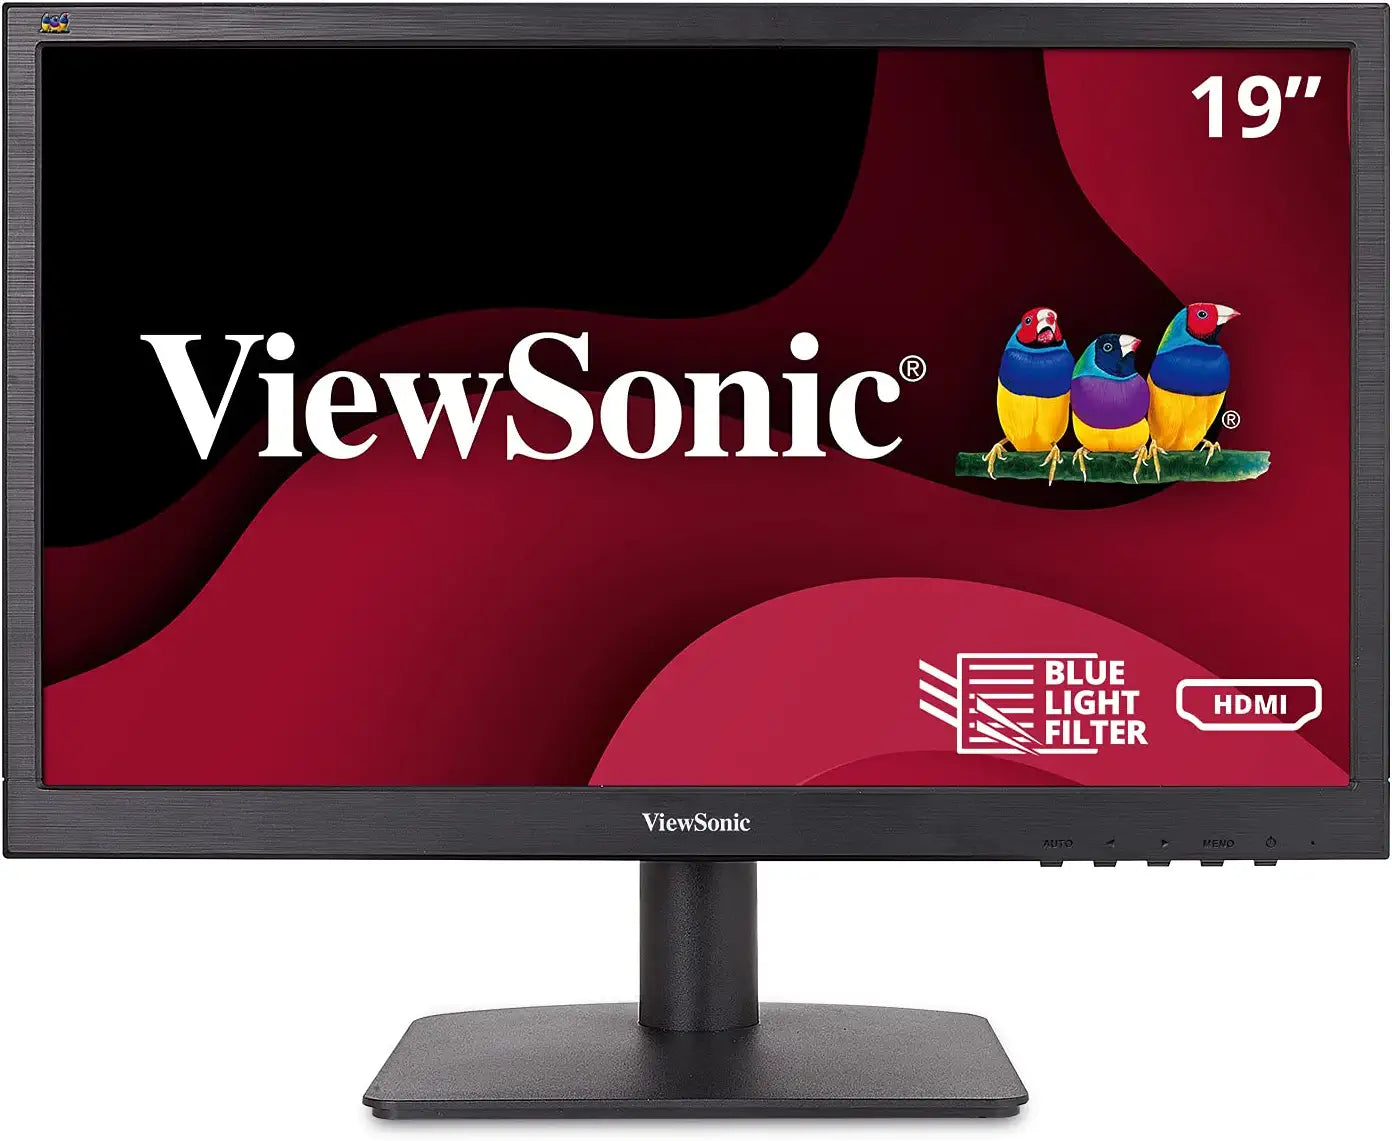 ViewSonic VA1903H 19-Inch WXGA 1366x768p 16:9 Widescreen Monitor with Enhanced View Comfort, Custom ViewModes and HDMI for Home and Office,Black